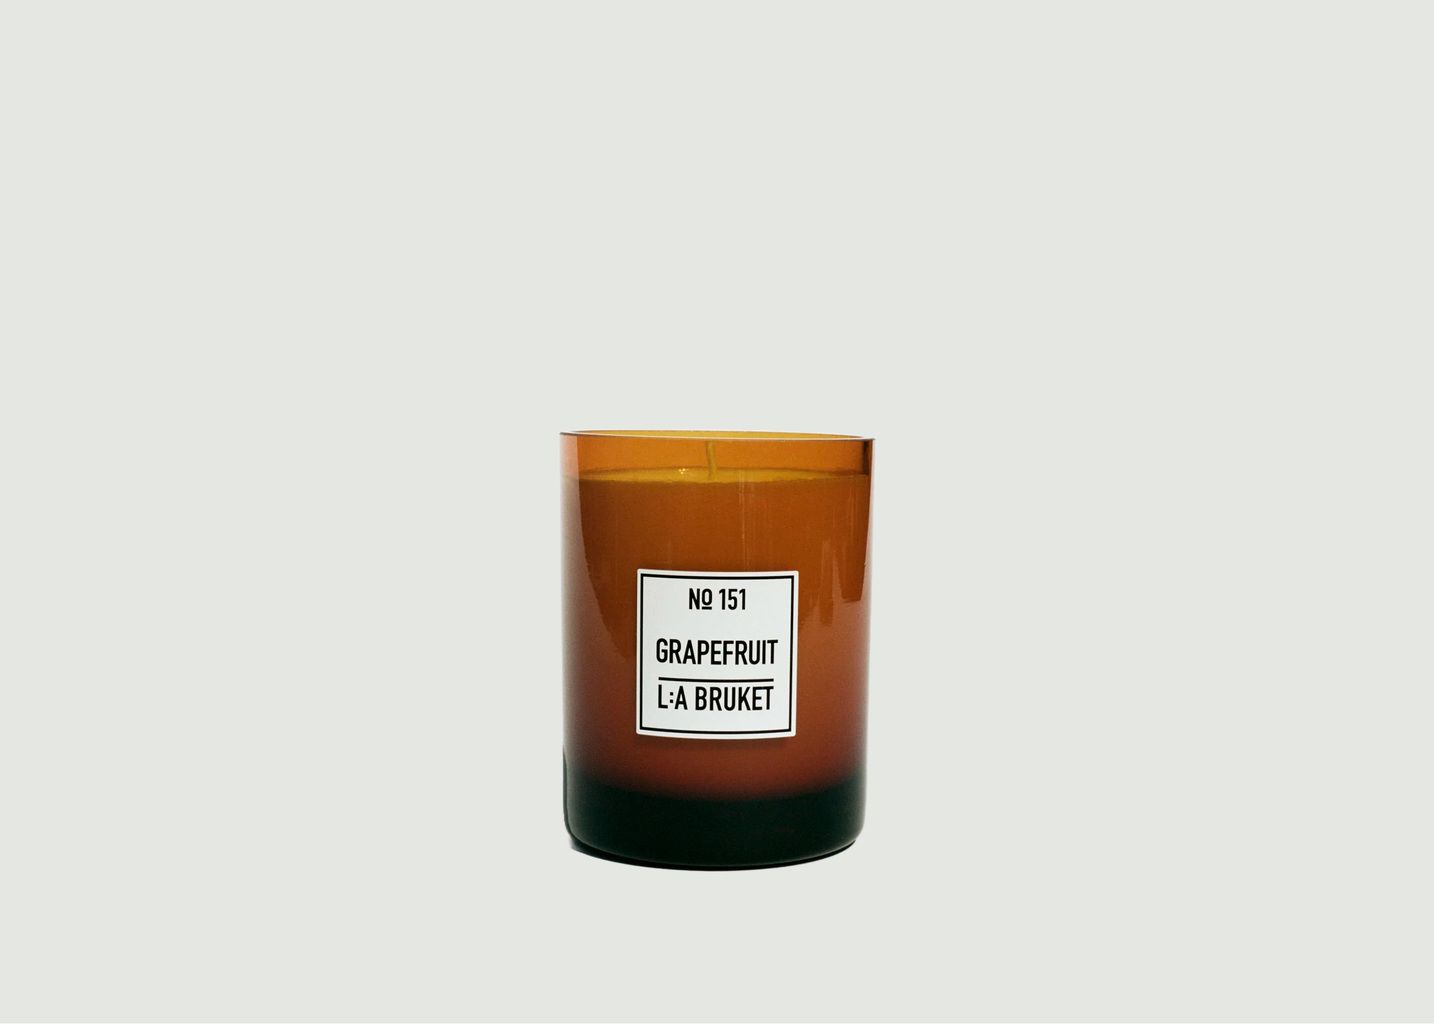 Scented candle 151 - L:A Bruket